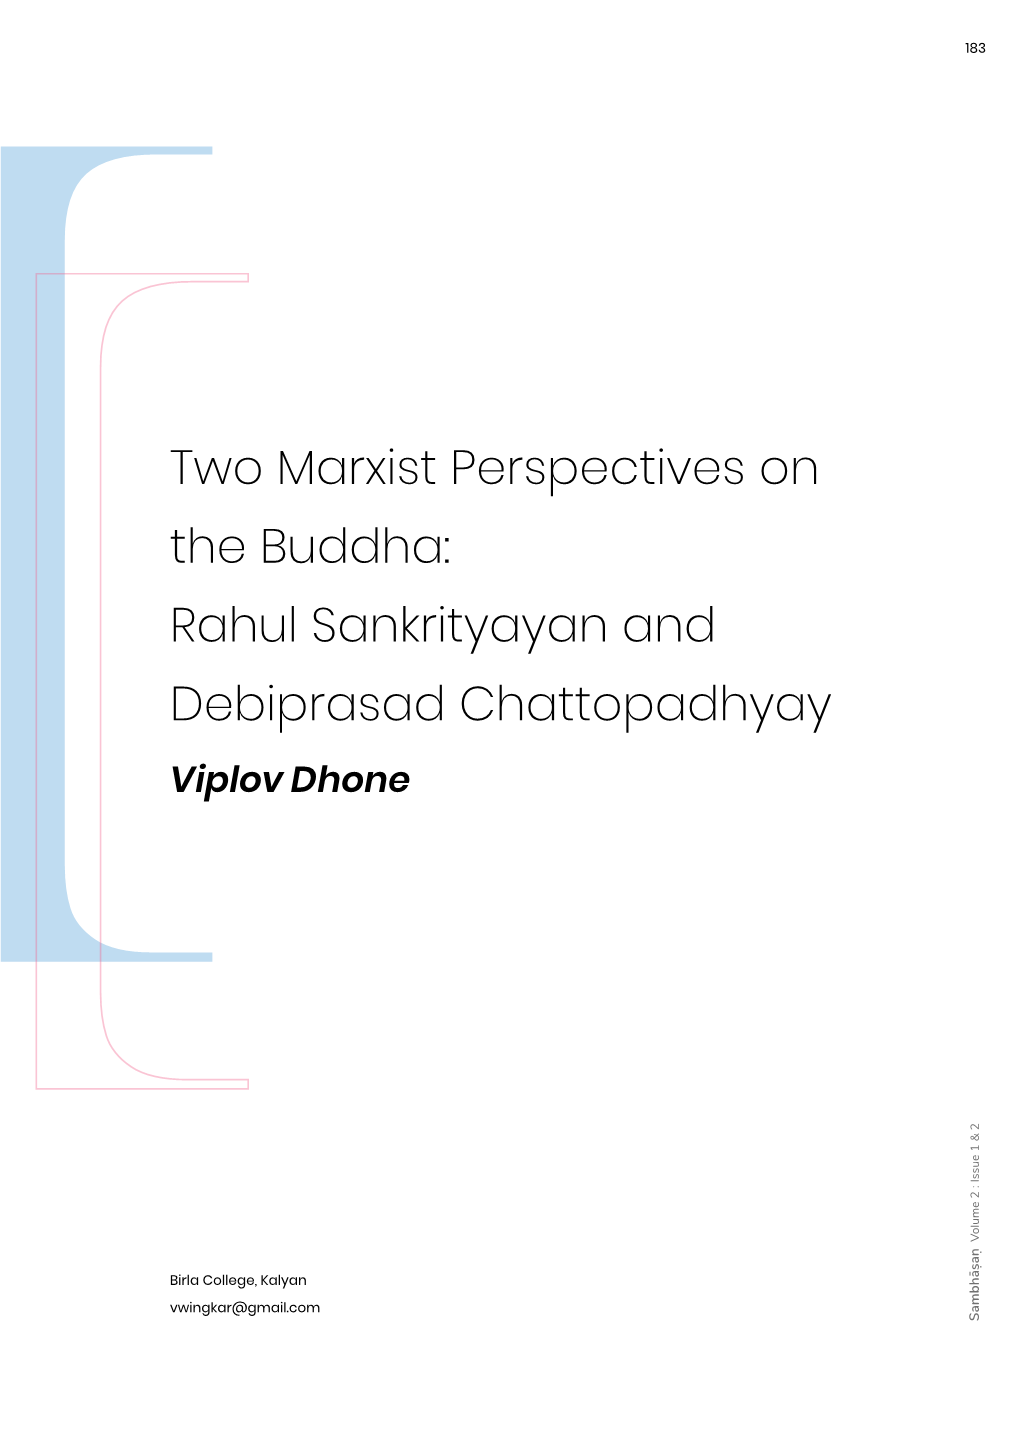 183-197 Two Marxist Perspectives on the Buddha – Rahul Sankrityayan and Debiprasad Chattopadhyay. Viplov Dhone